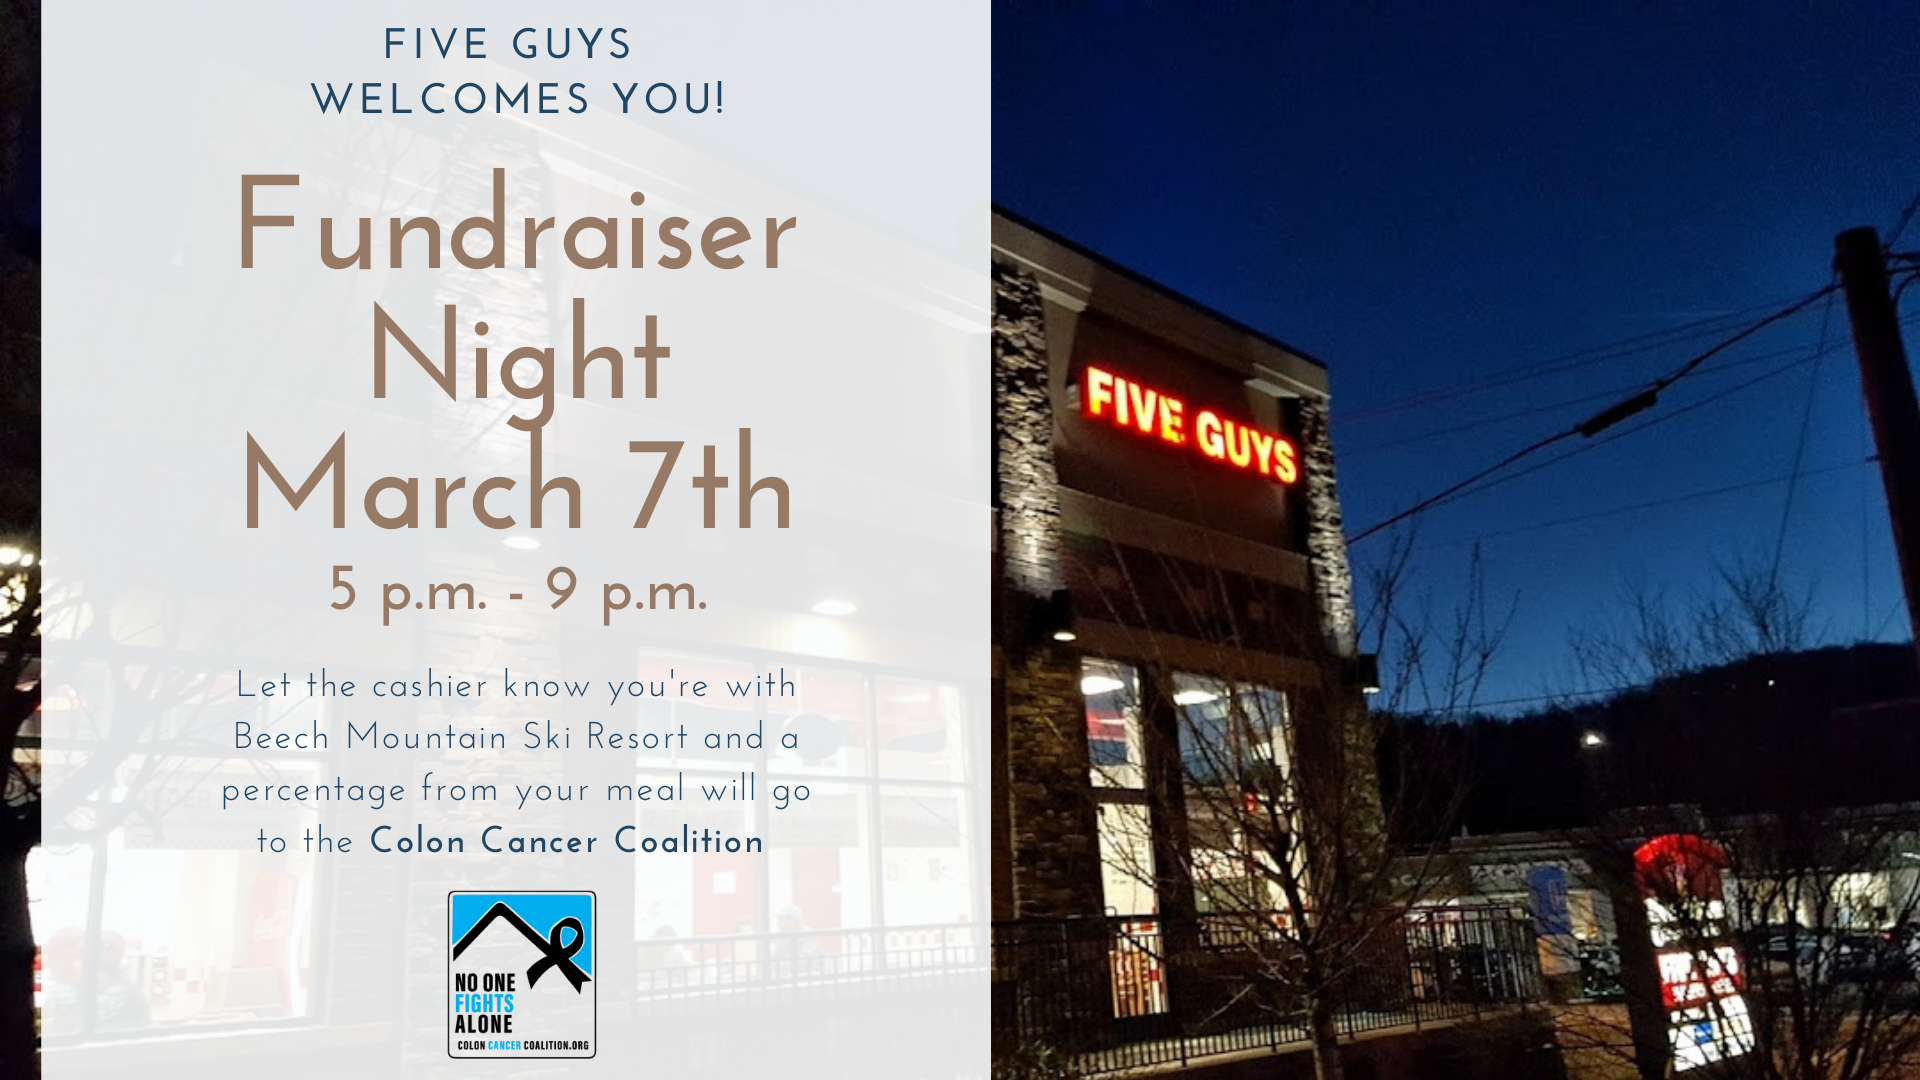 poster for five guys fundraiser event on 3/7